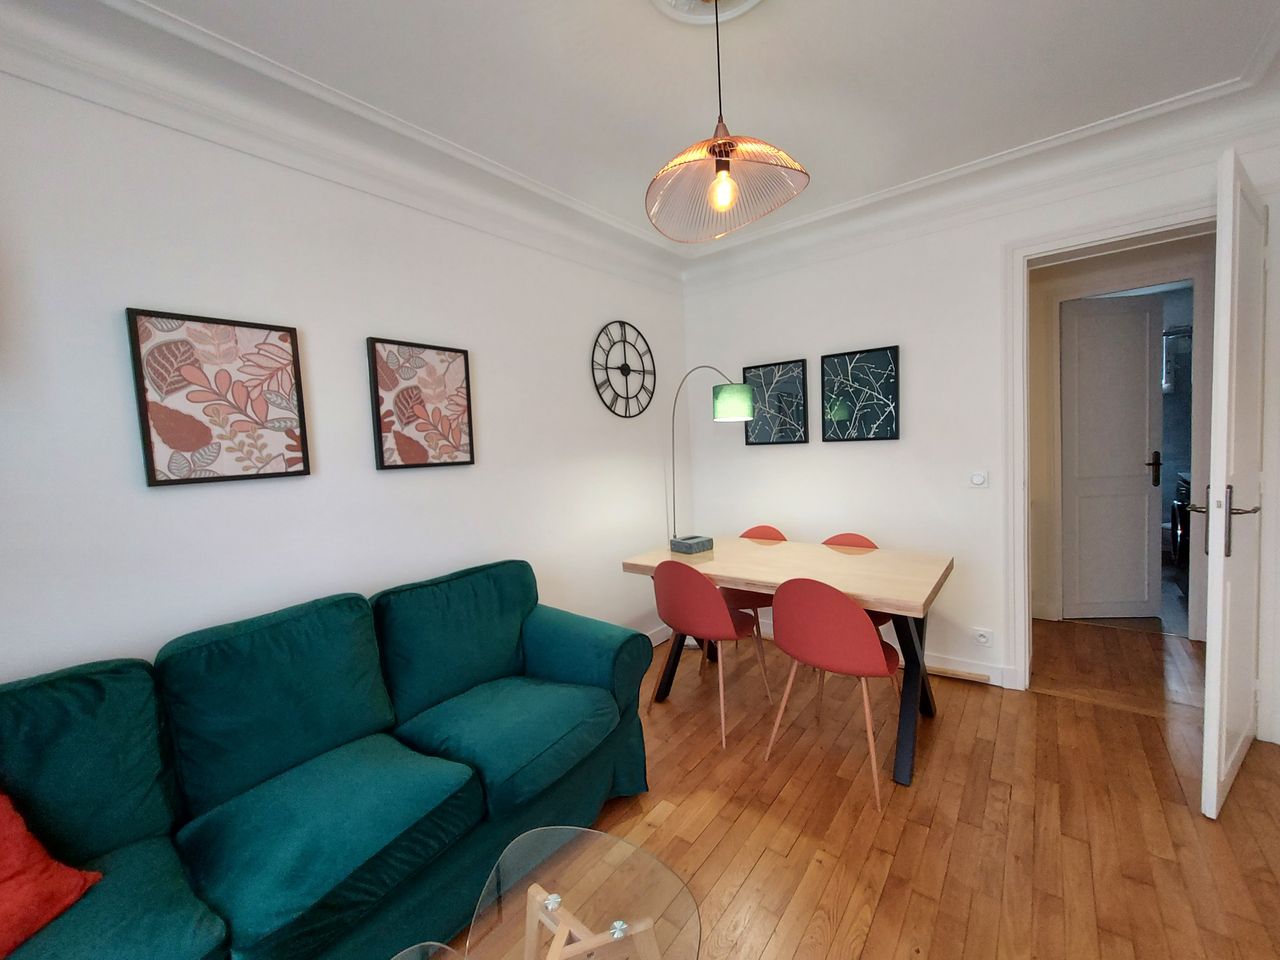 2 Bedroom Flat, with Sacre-Coeur View